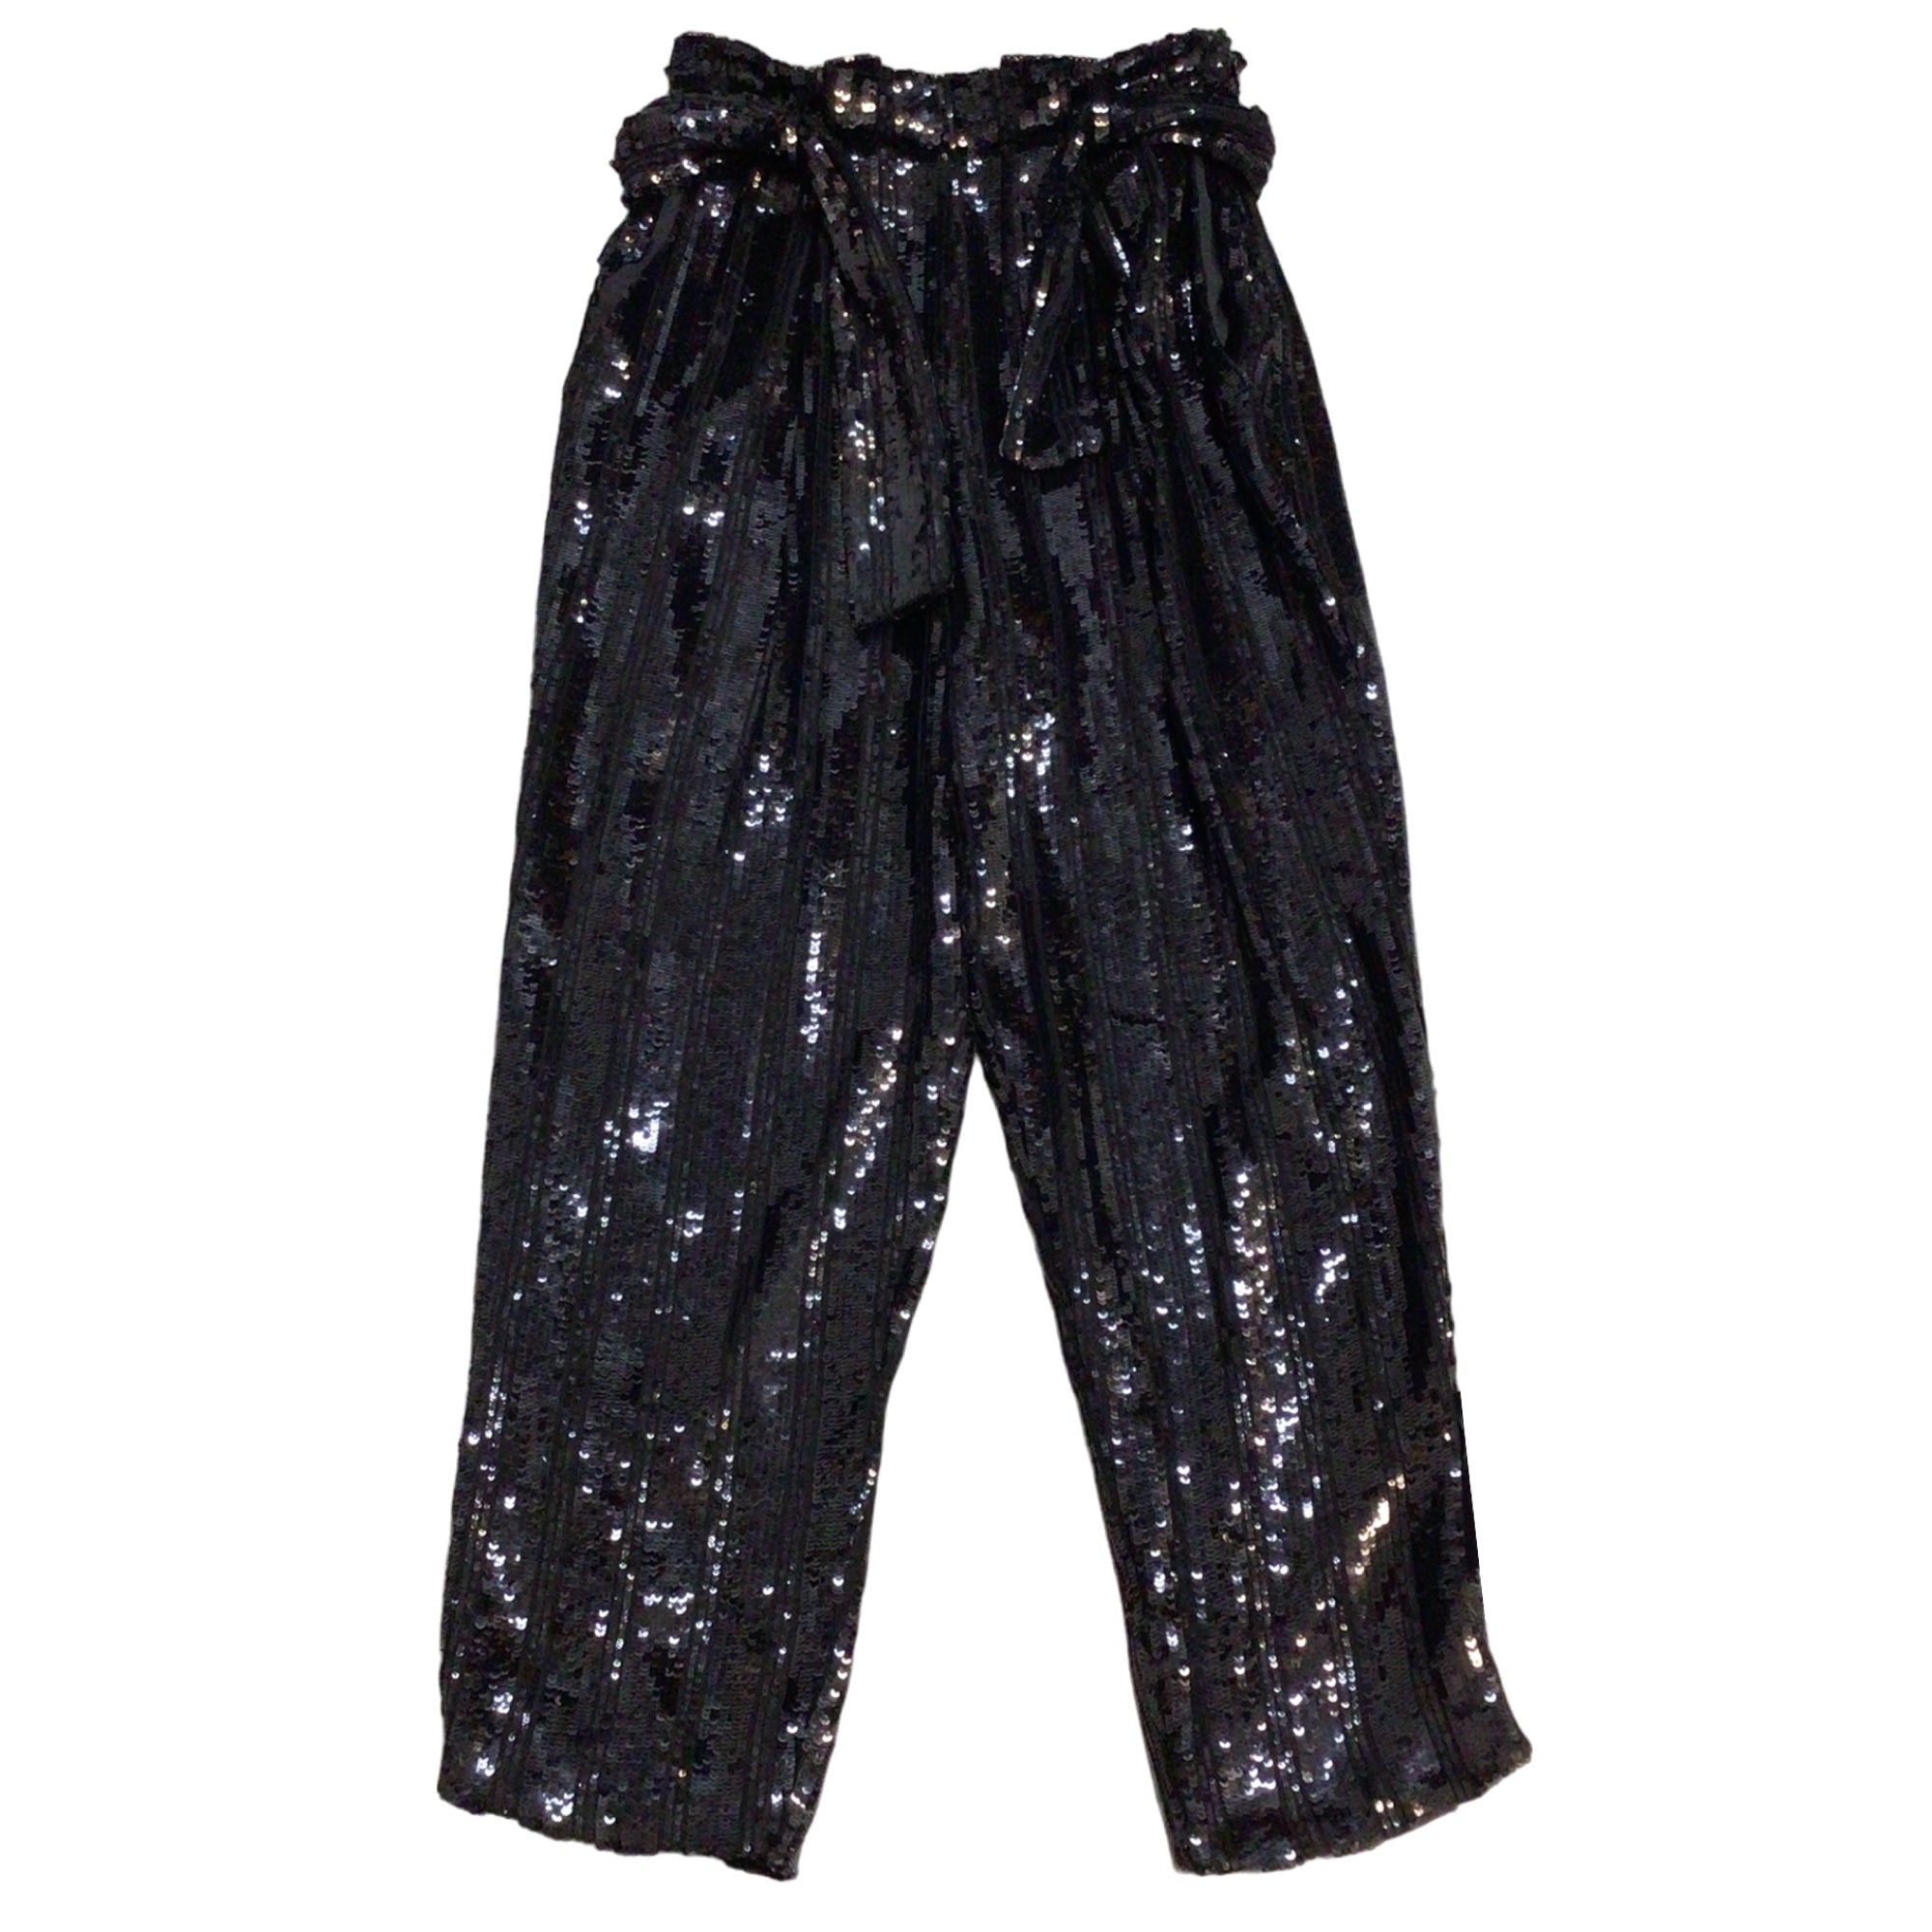 Sally LaPointe Black Sequined Belted Pants / Trousers